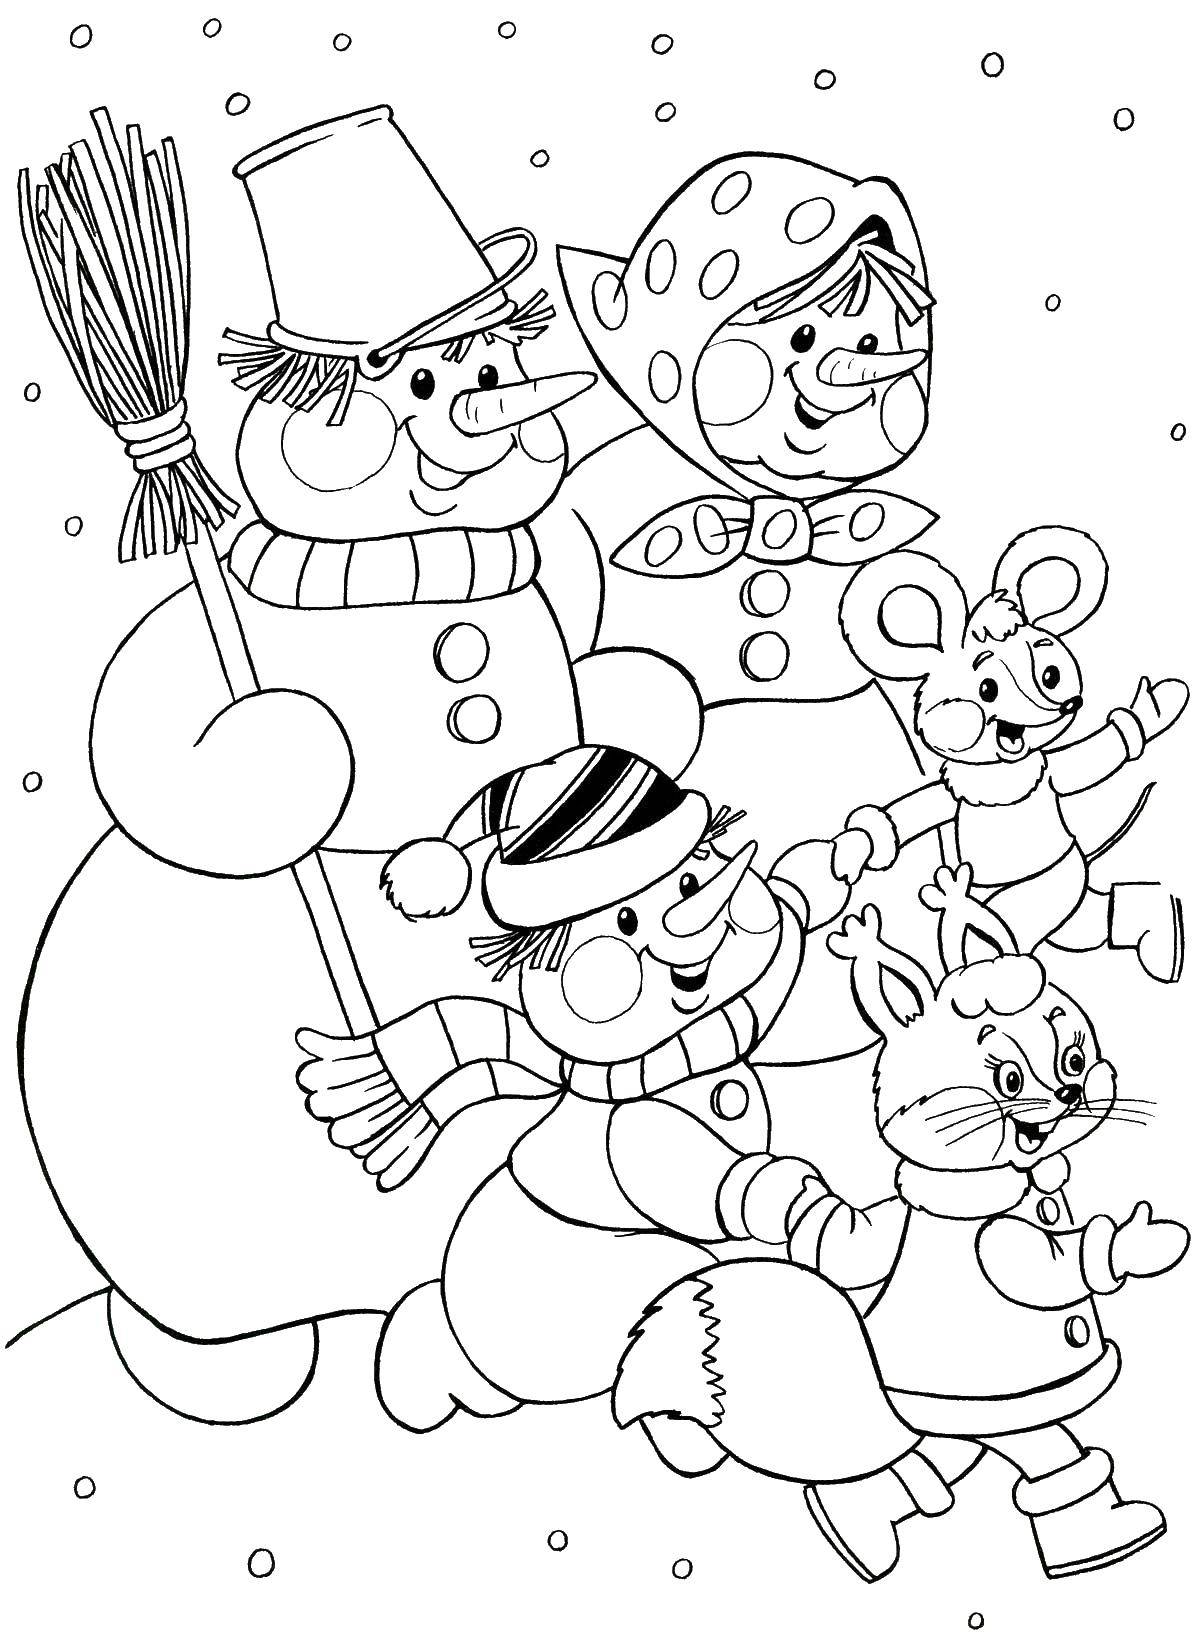 Coloring Snowmen,animals. Category Coloring pages for kids. Tags:  snowmen, animals.